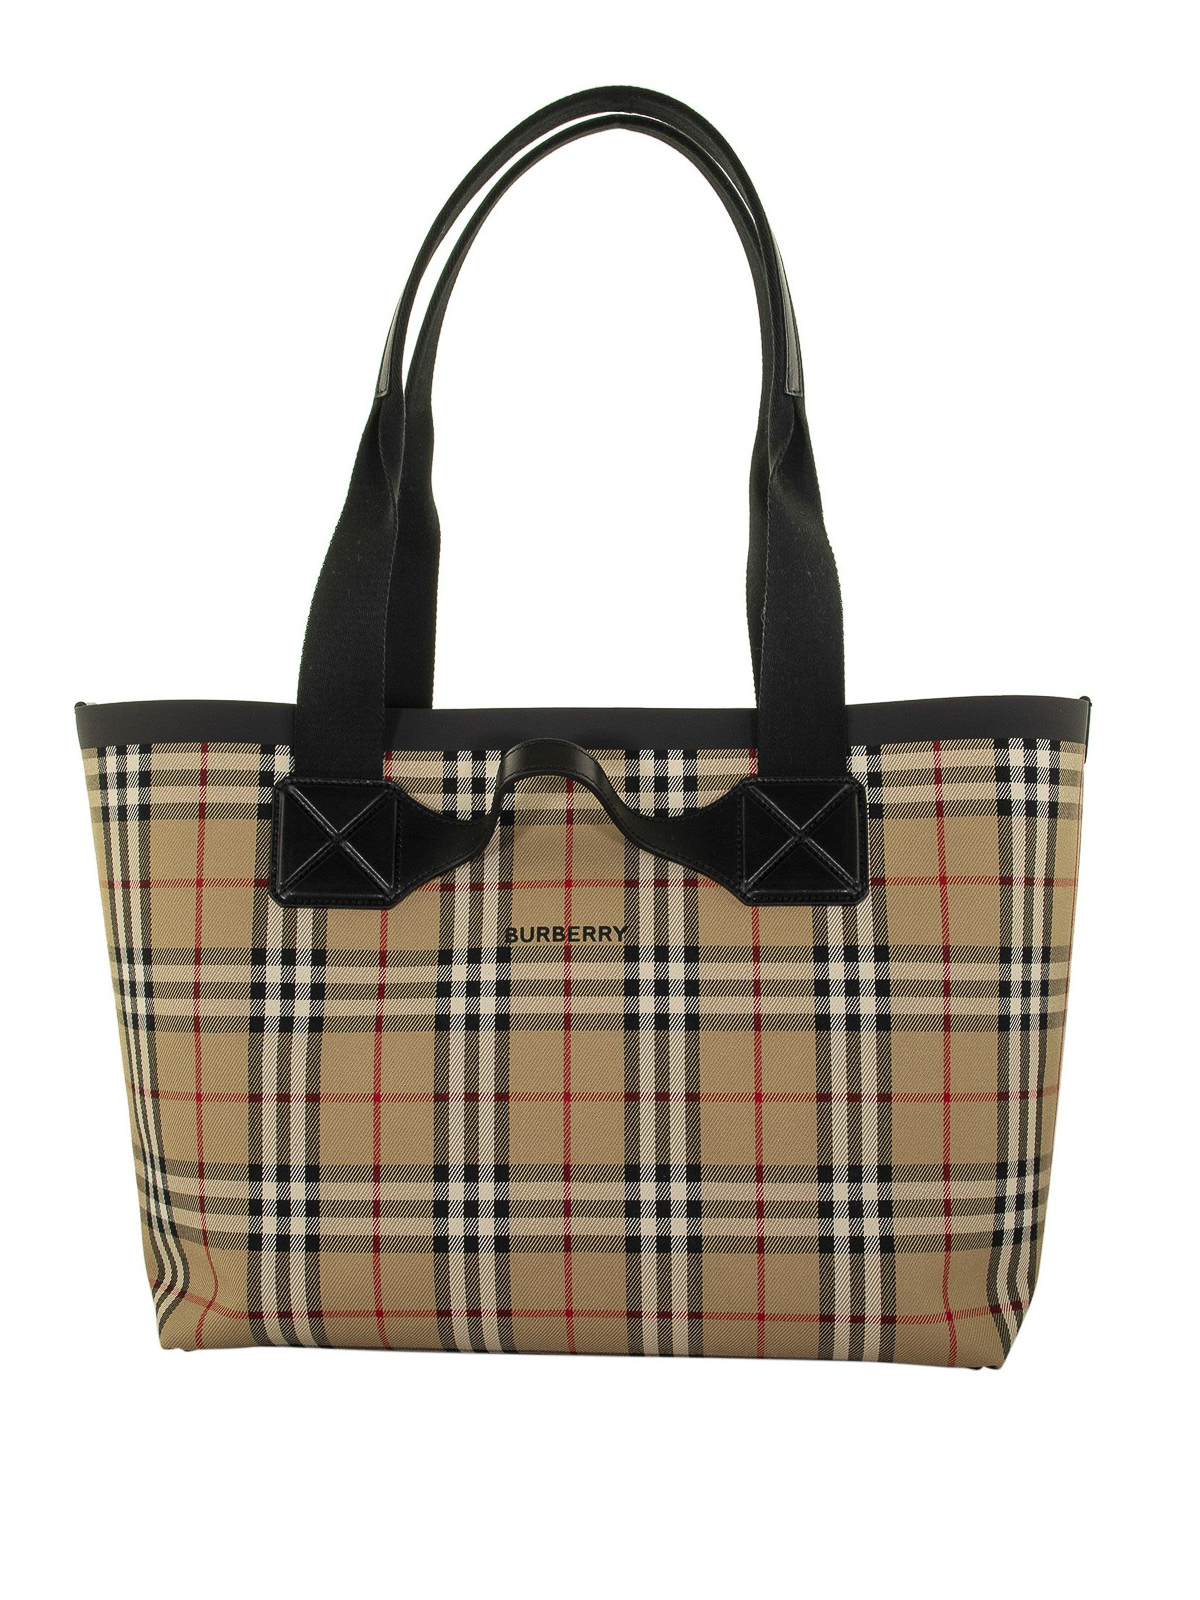 Vintage Burberry Tote Bags | SEMA Data Co-op